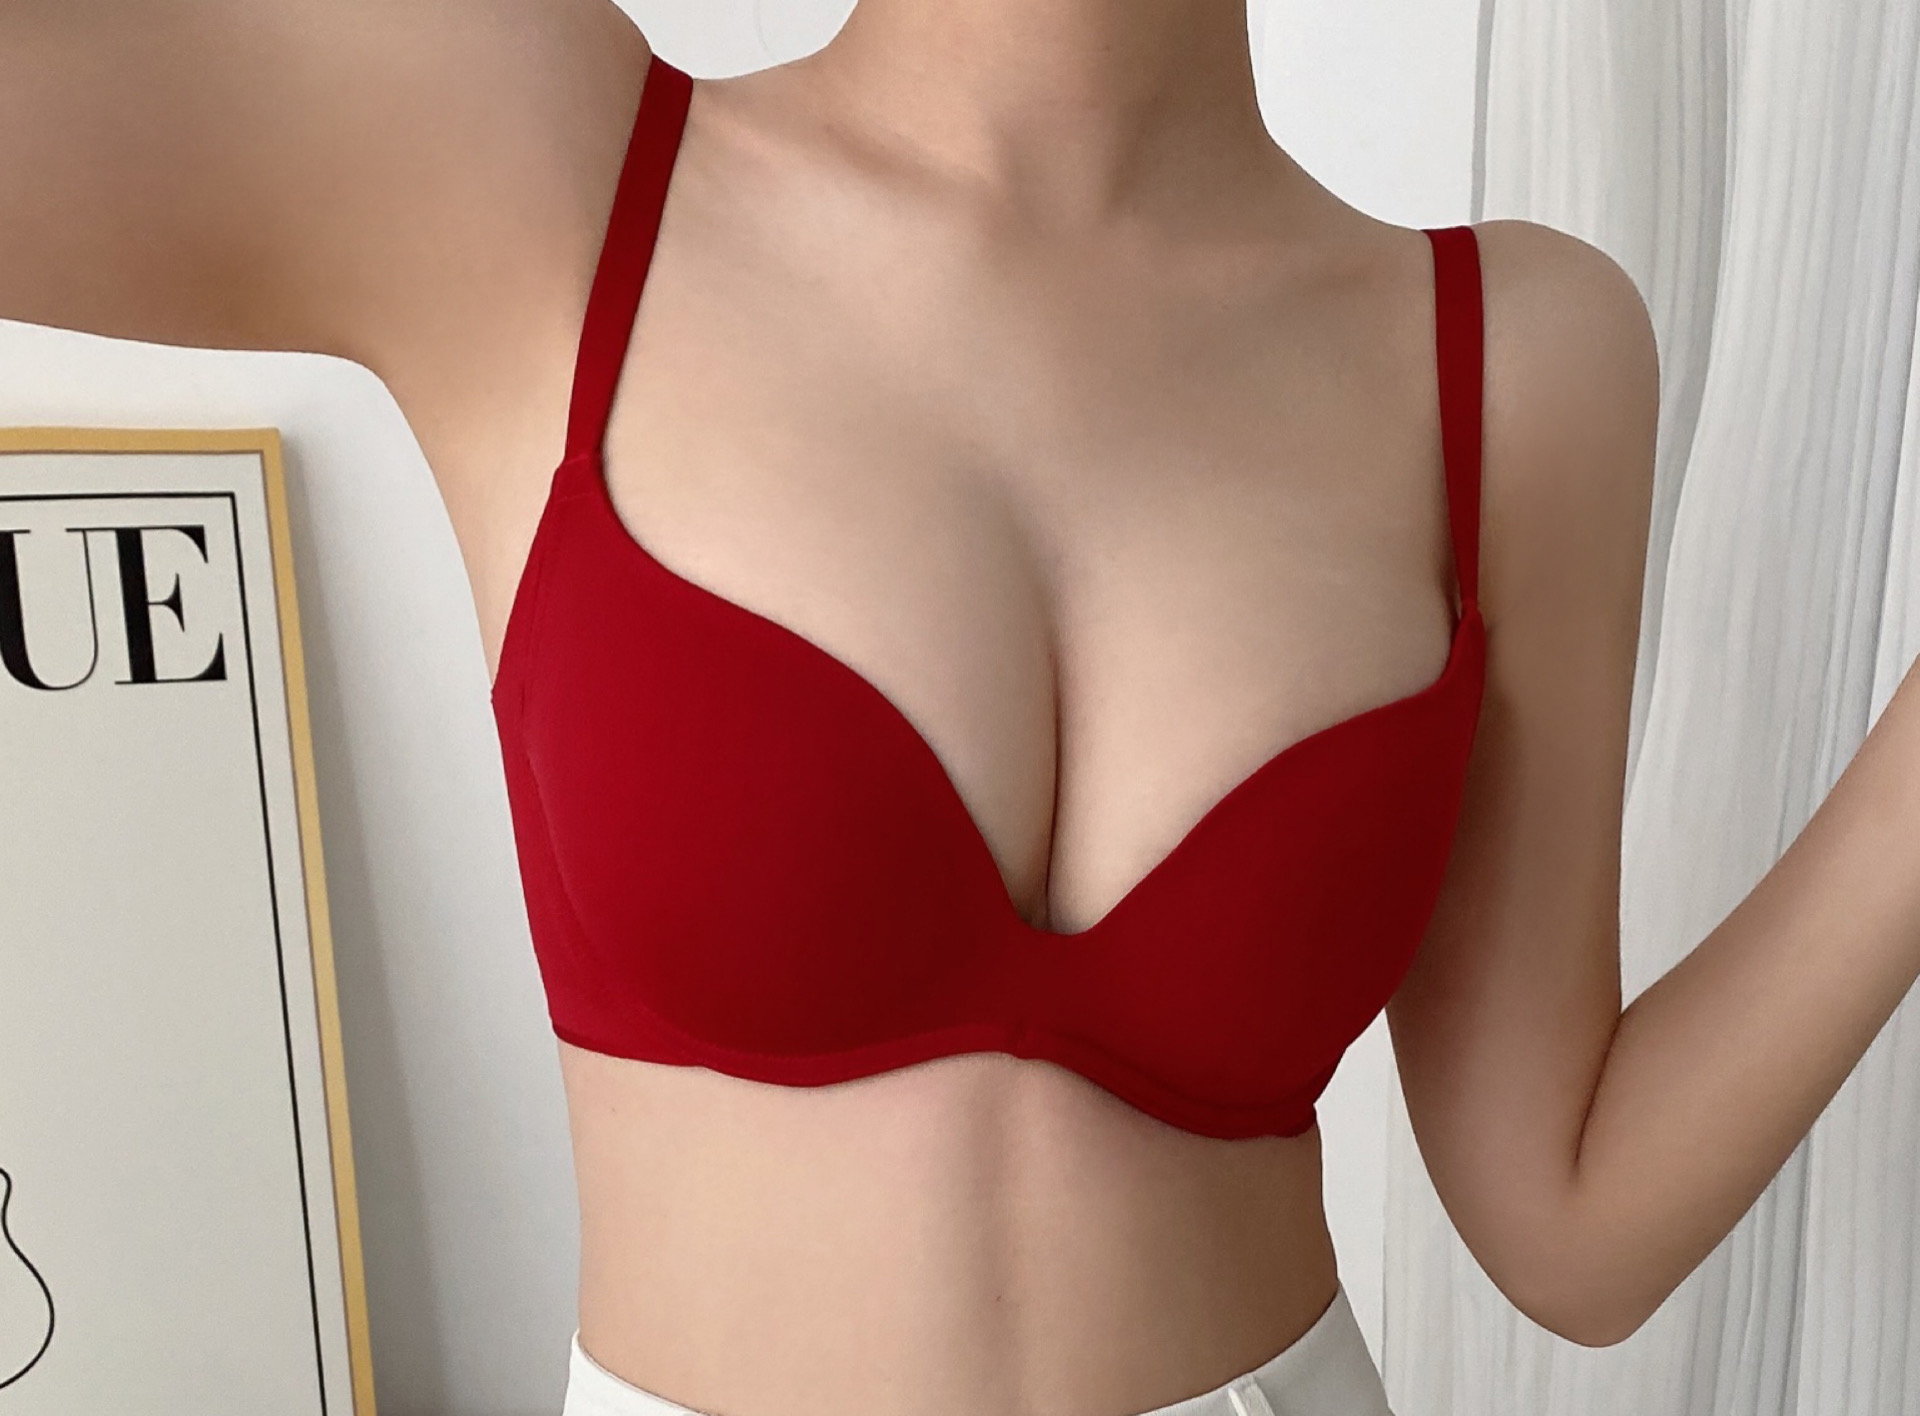 Bras Smooth Seamless Underwear Memory Underwire Small Chest Push Up Breast  Anti Sag Sports Beauty Back Bra Deep V From Xieyunn, $11.15